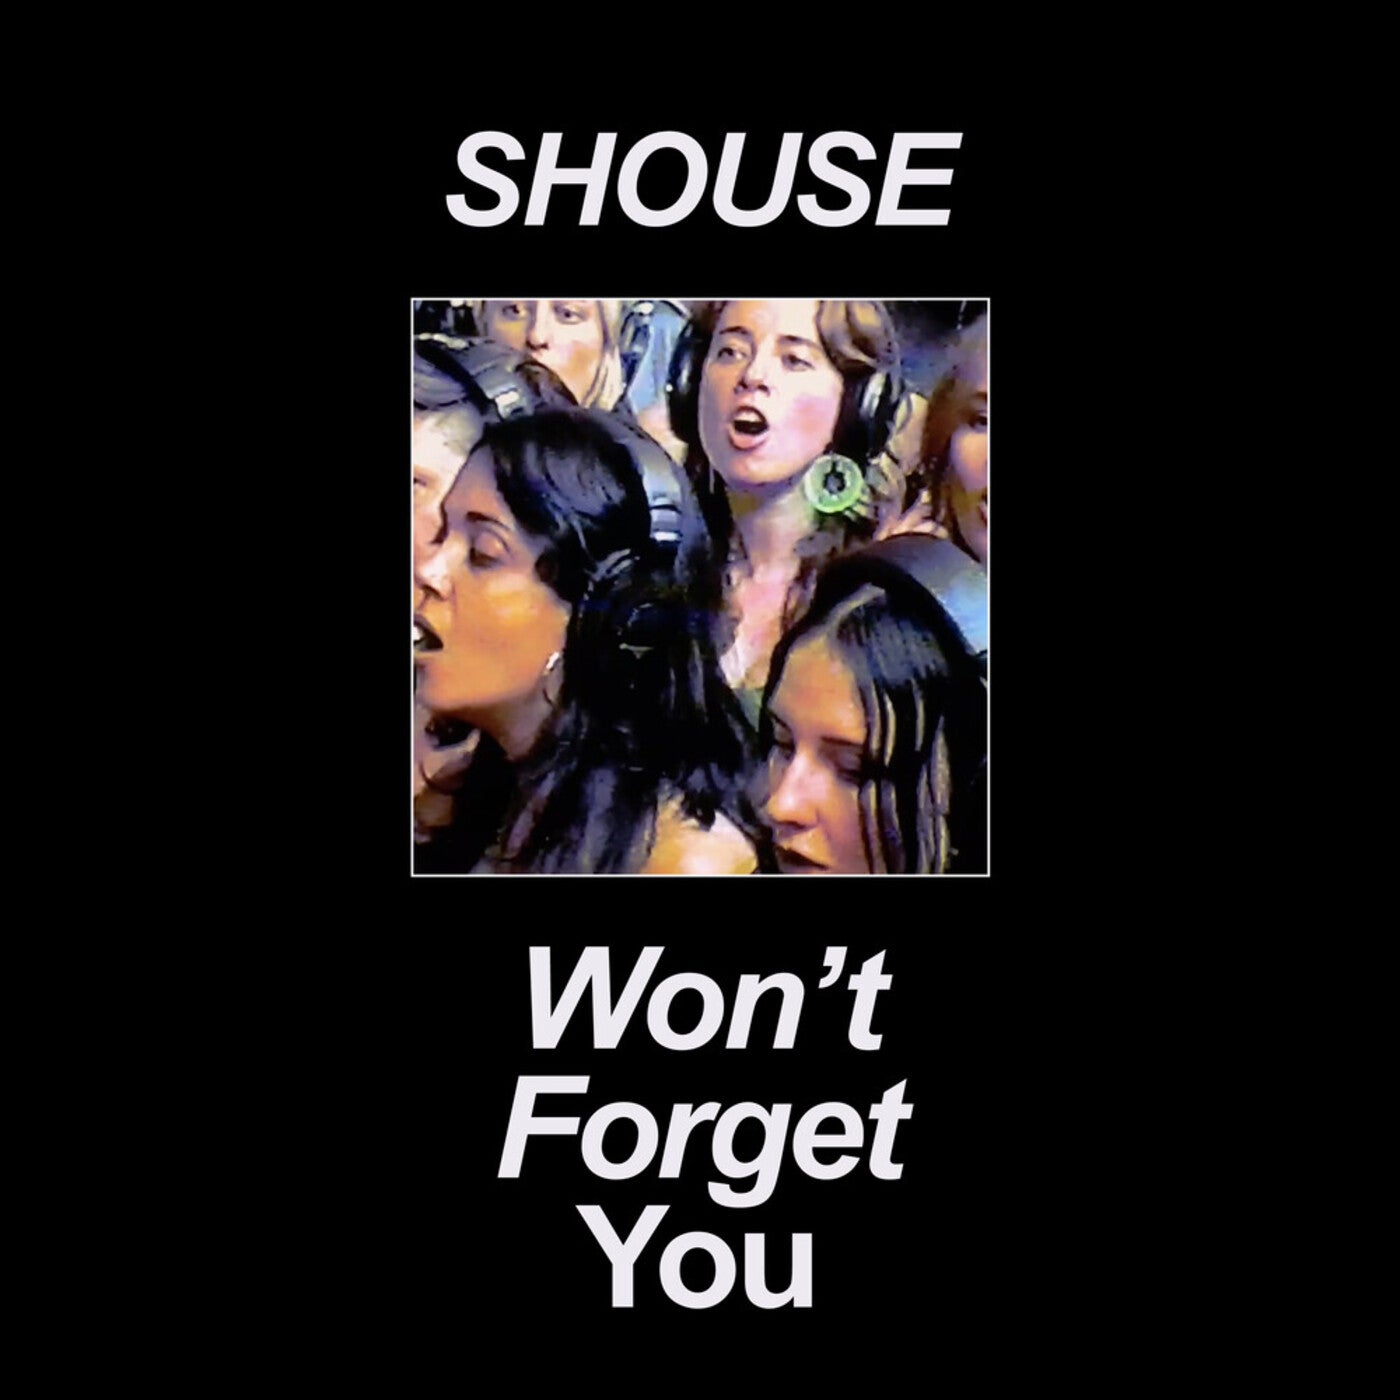 Shouse - Won't Forget You (Club Mix)